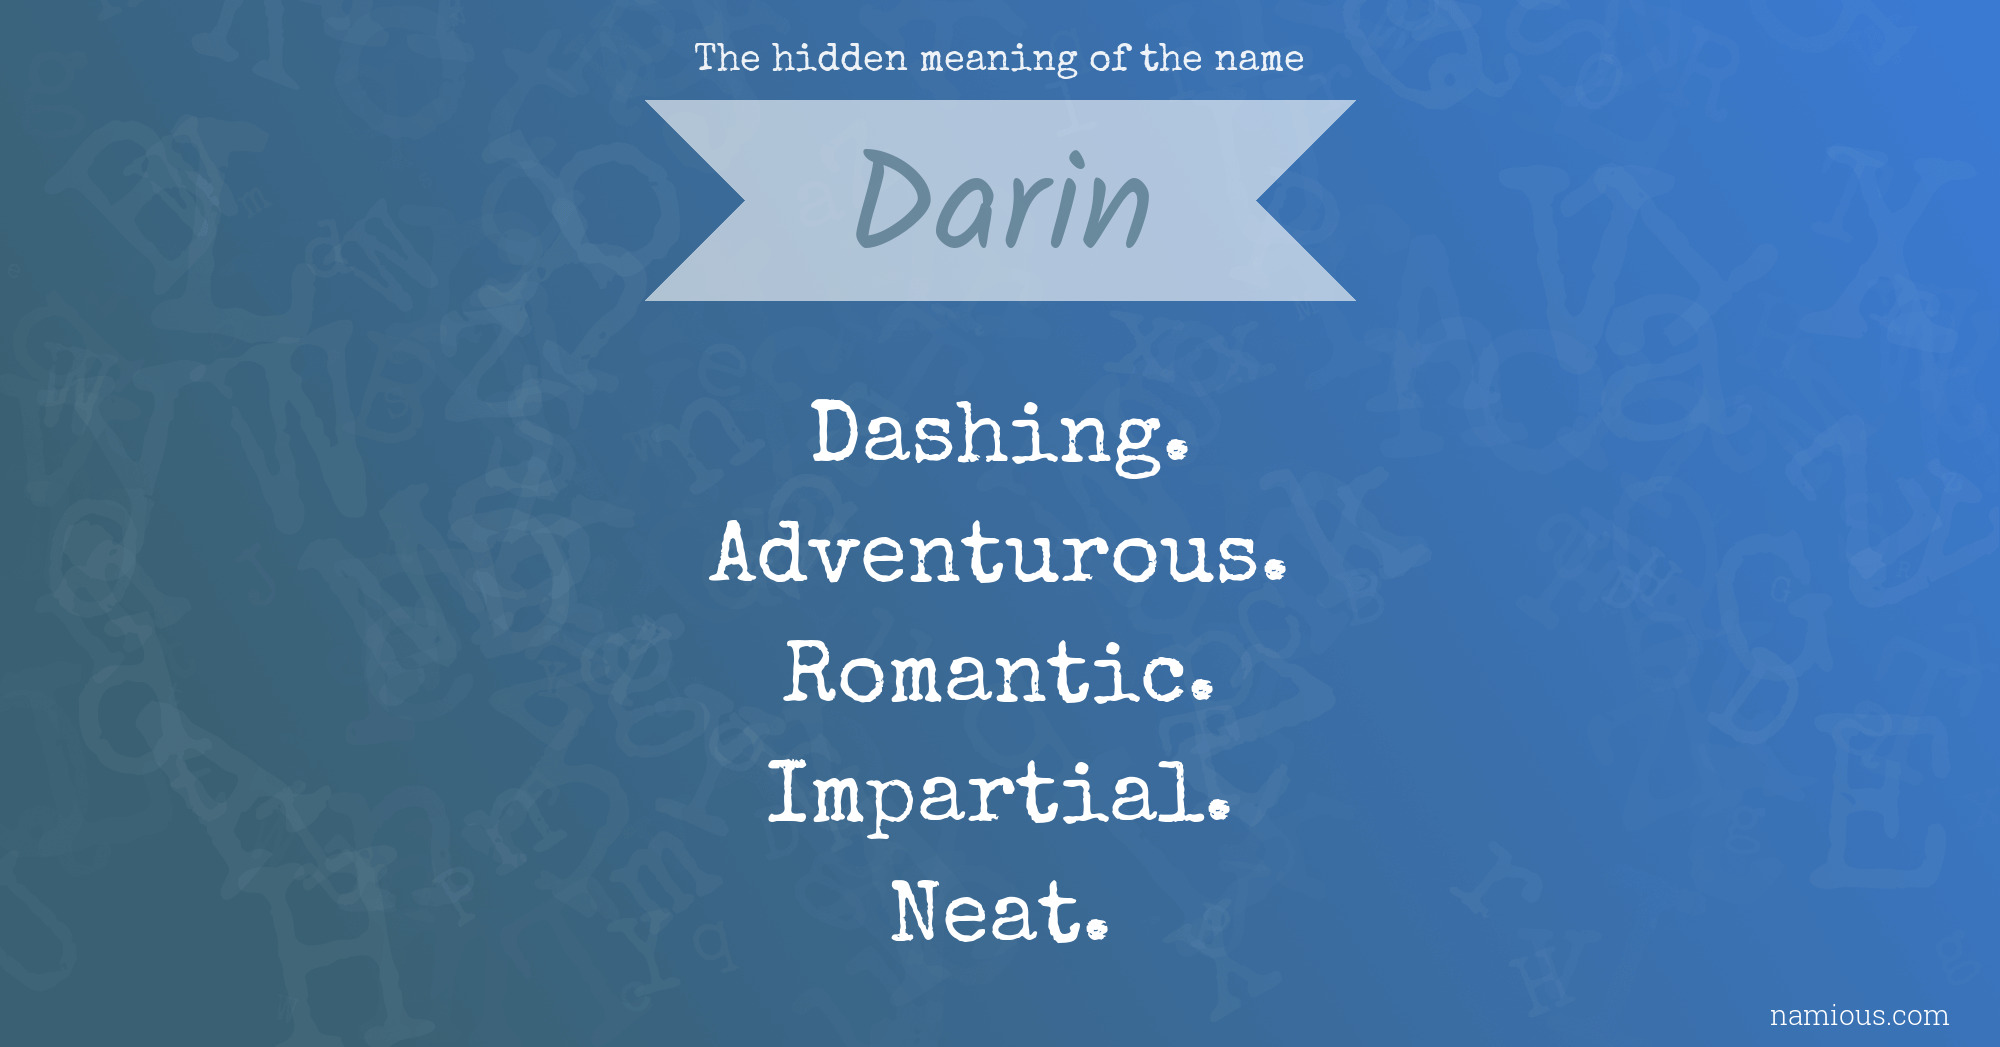 The hidden meaning of the name Darin